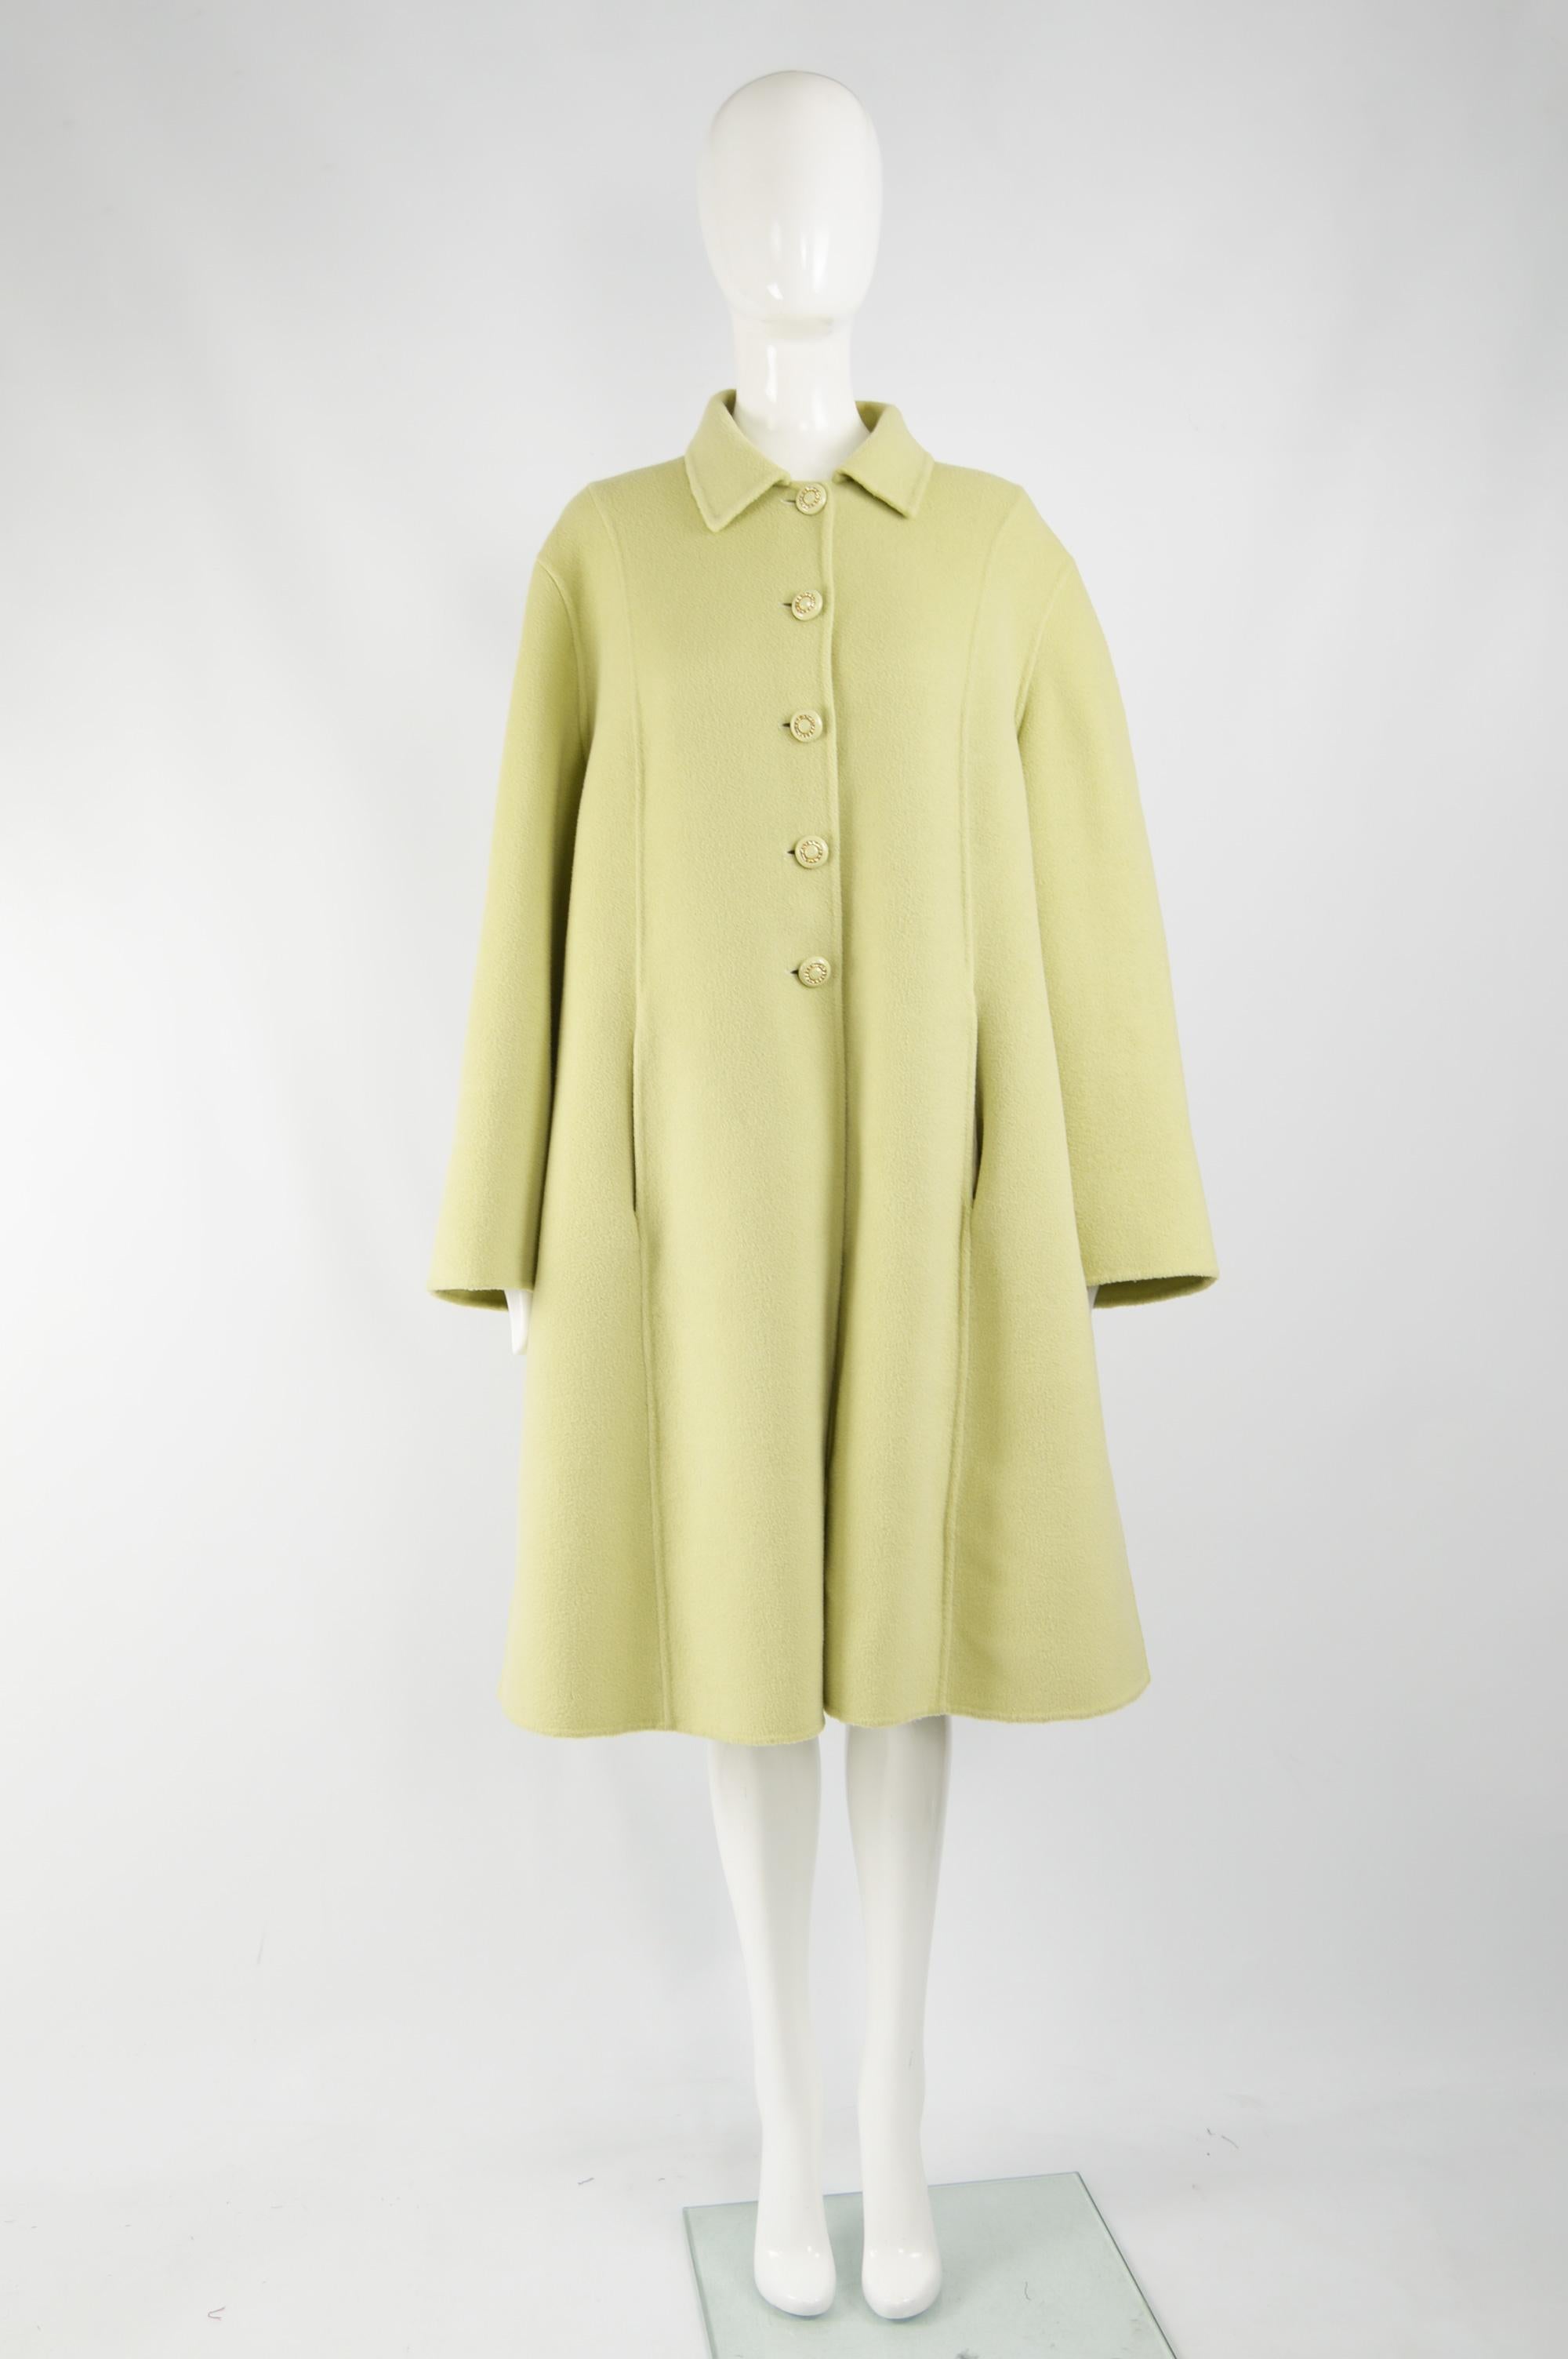 A beautiful vintage womens Valentino evening / opera coat from the 80s. In a pastel green incredibly soft cashgora (a rare crossbreed of a cashmere goat and Russian fiber goat). With a trapeze / swing fit, it has self covered buttons embellished